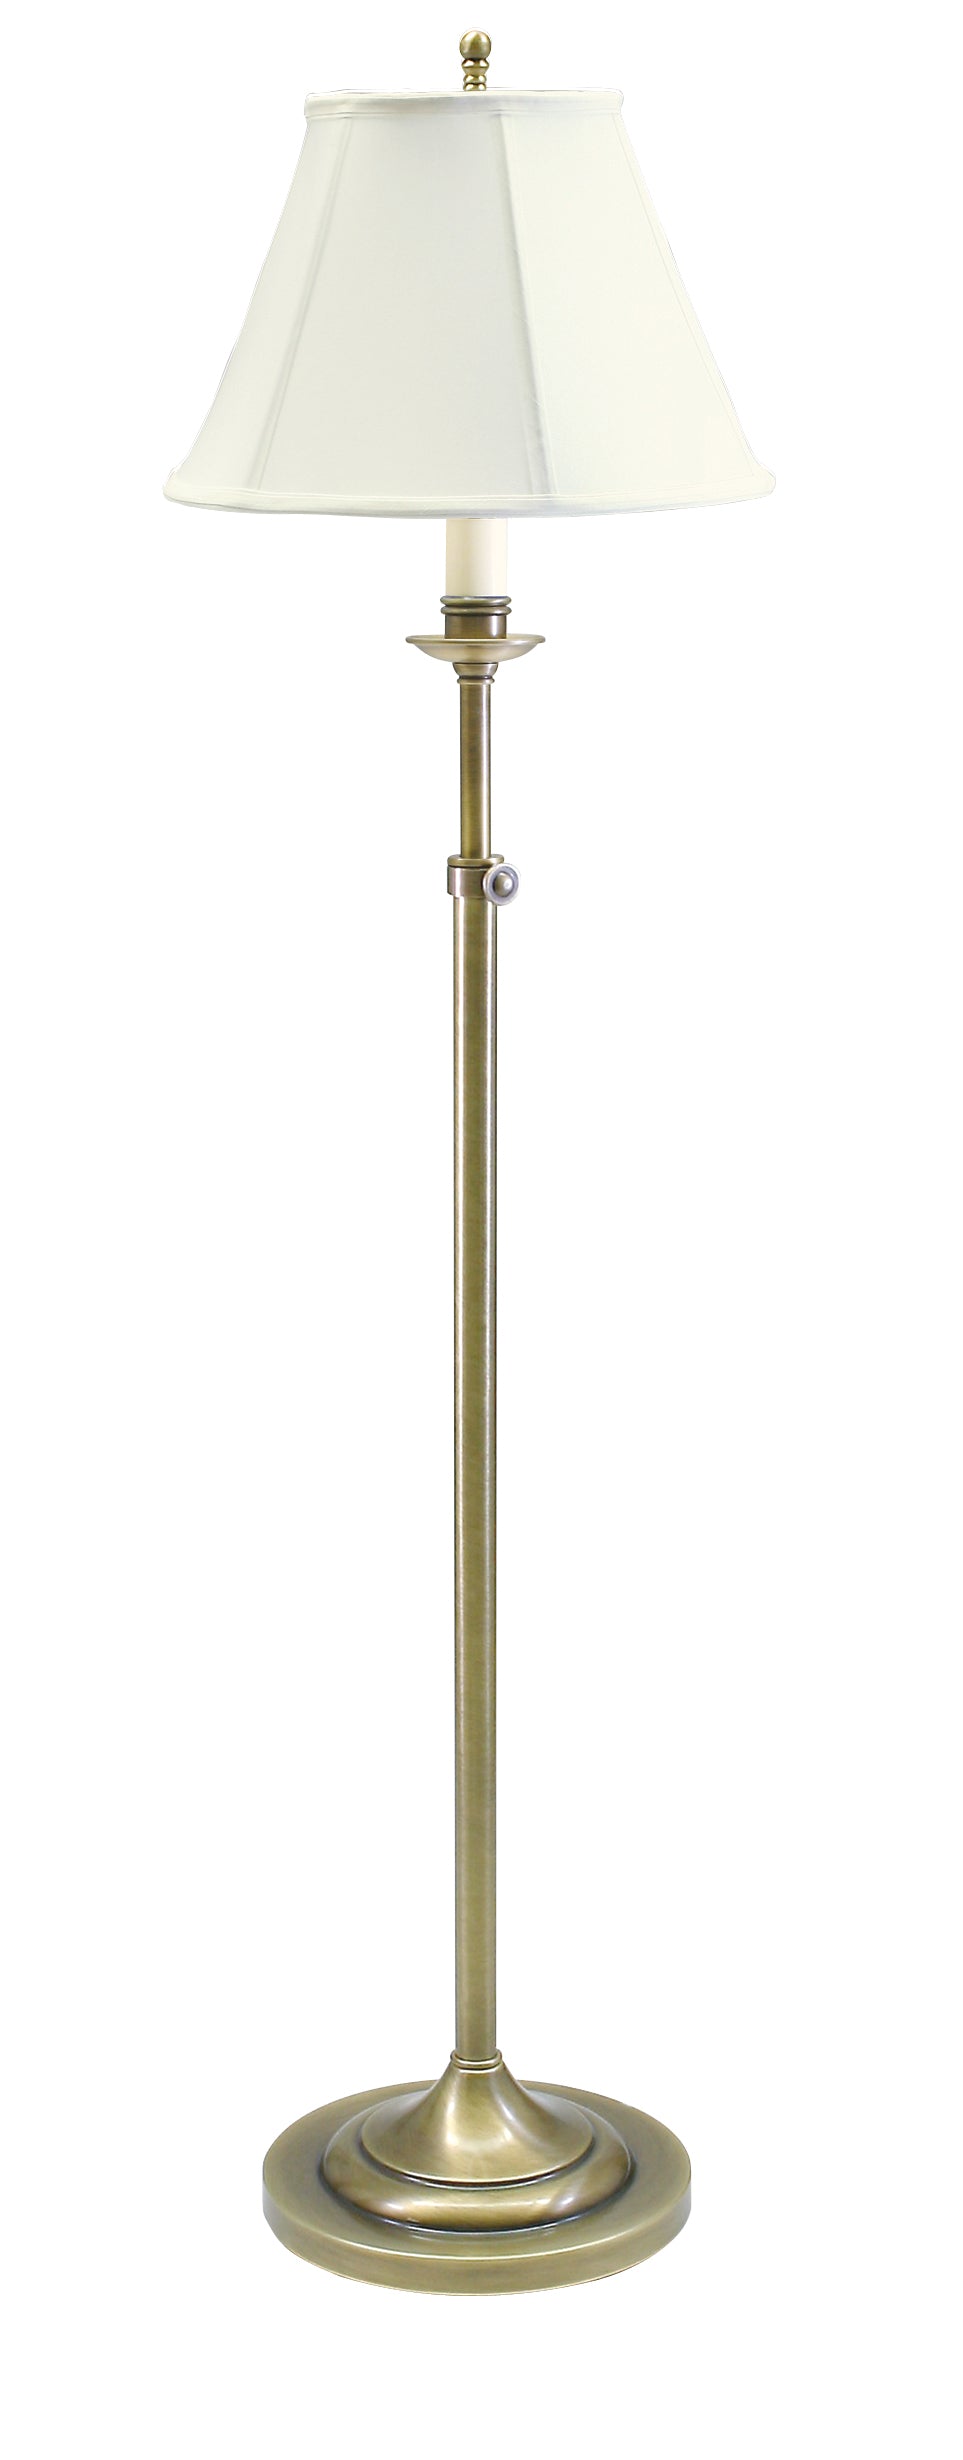 House of Troy Club Adjustable Antique Brass Floor Lamp CL201-AB